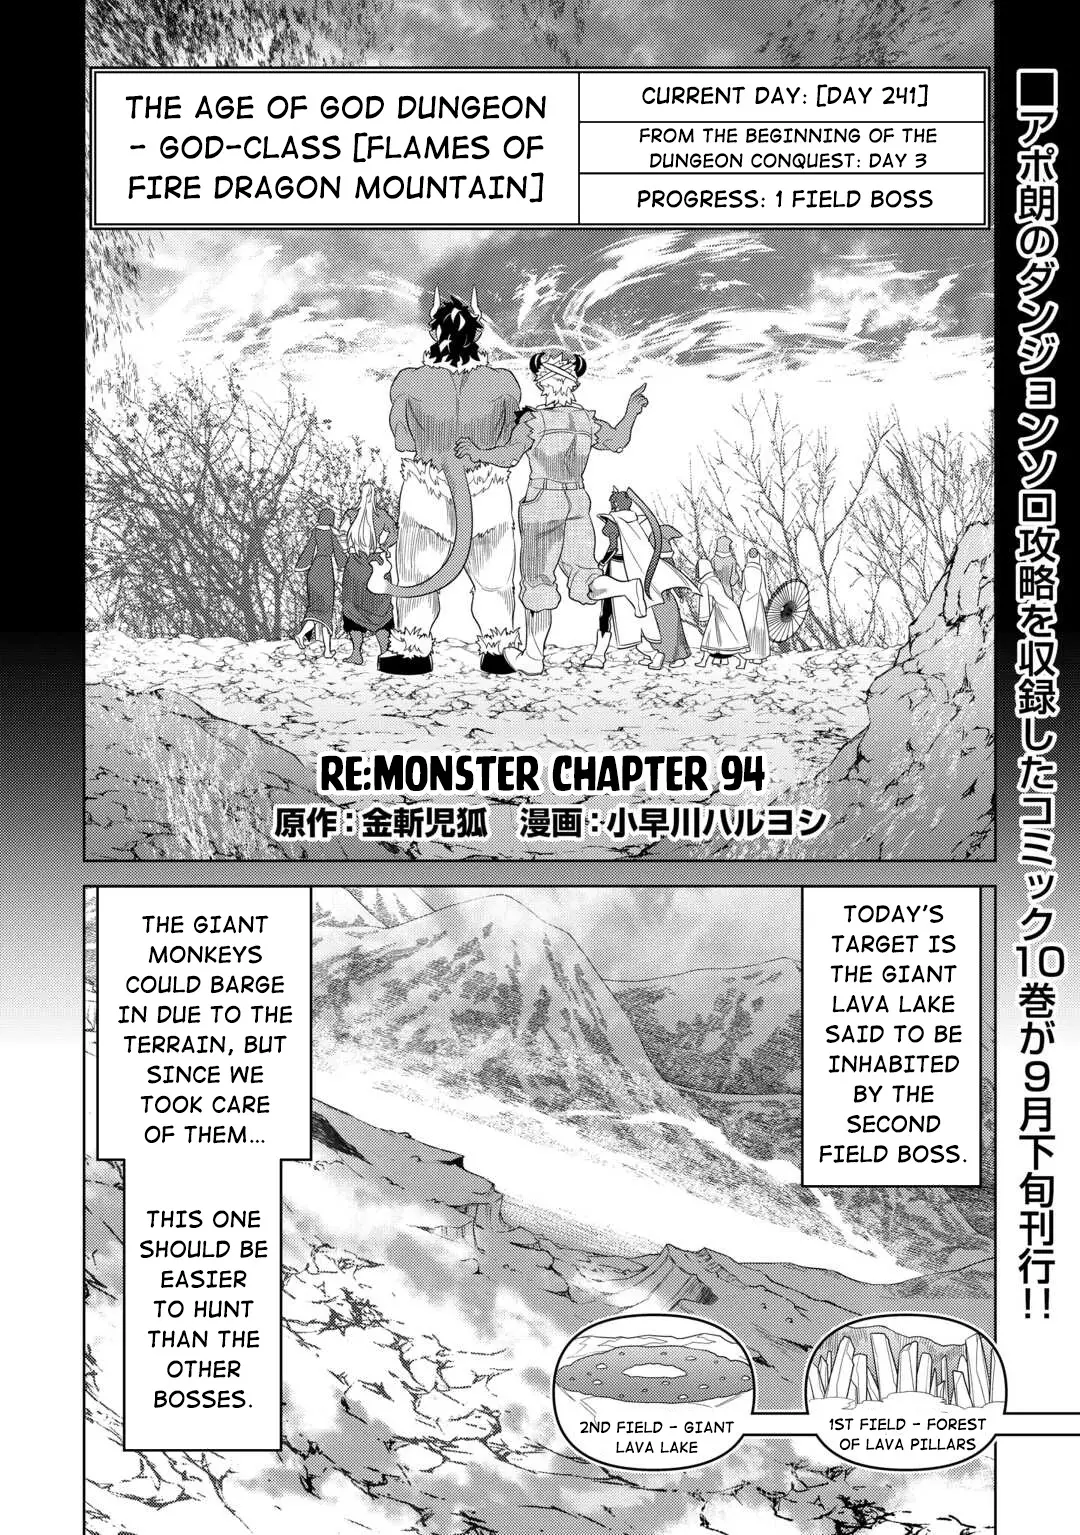 Re:Monster - 94 page 2-cf088e2c